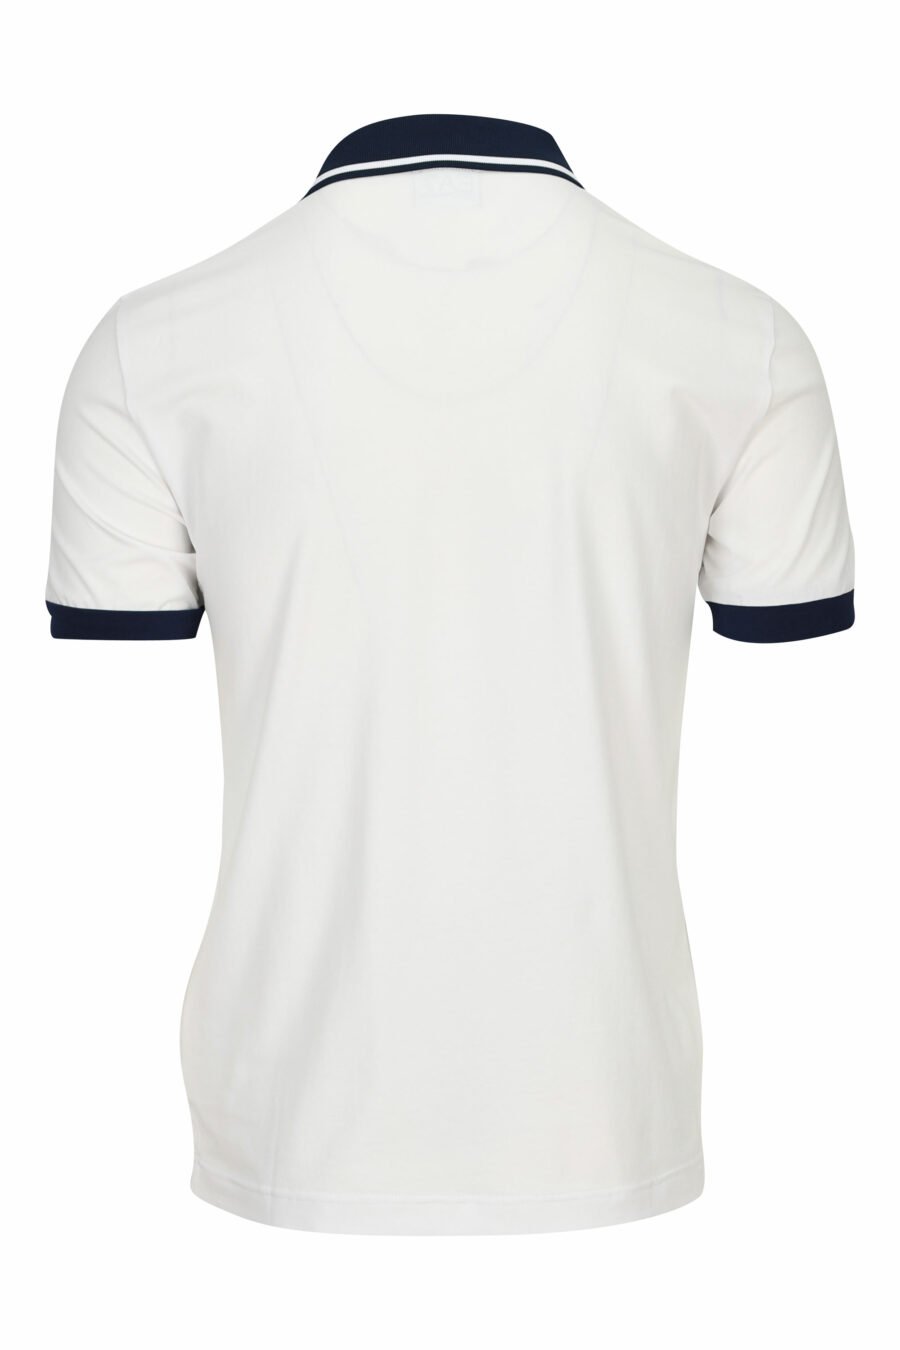 White polo shirt with mini logo "lux identity" on shoulder band - 8058947458868